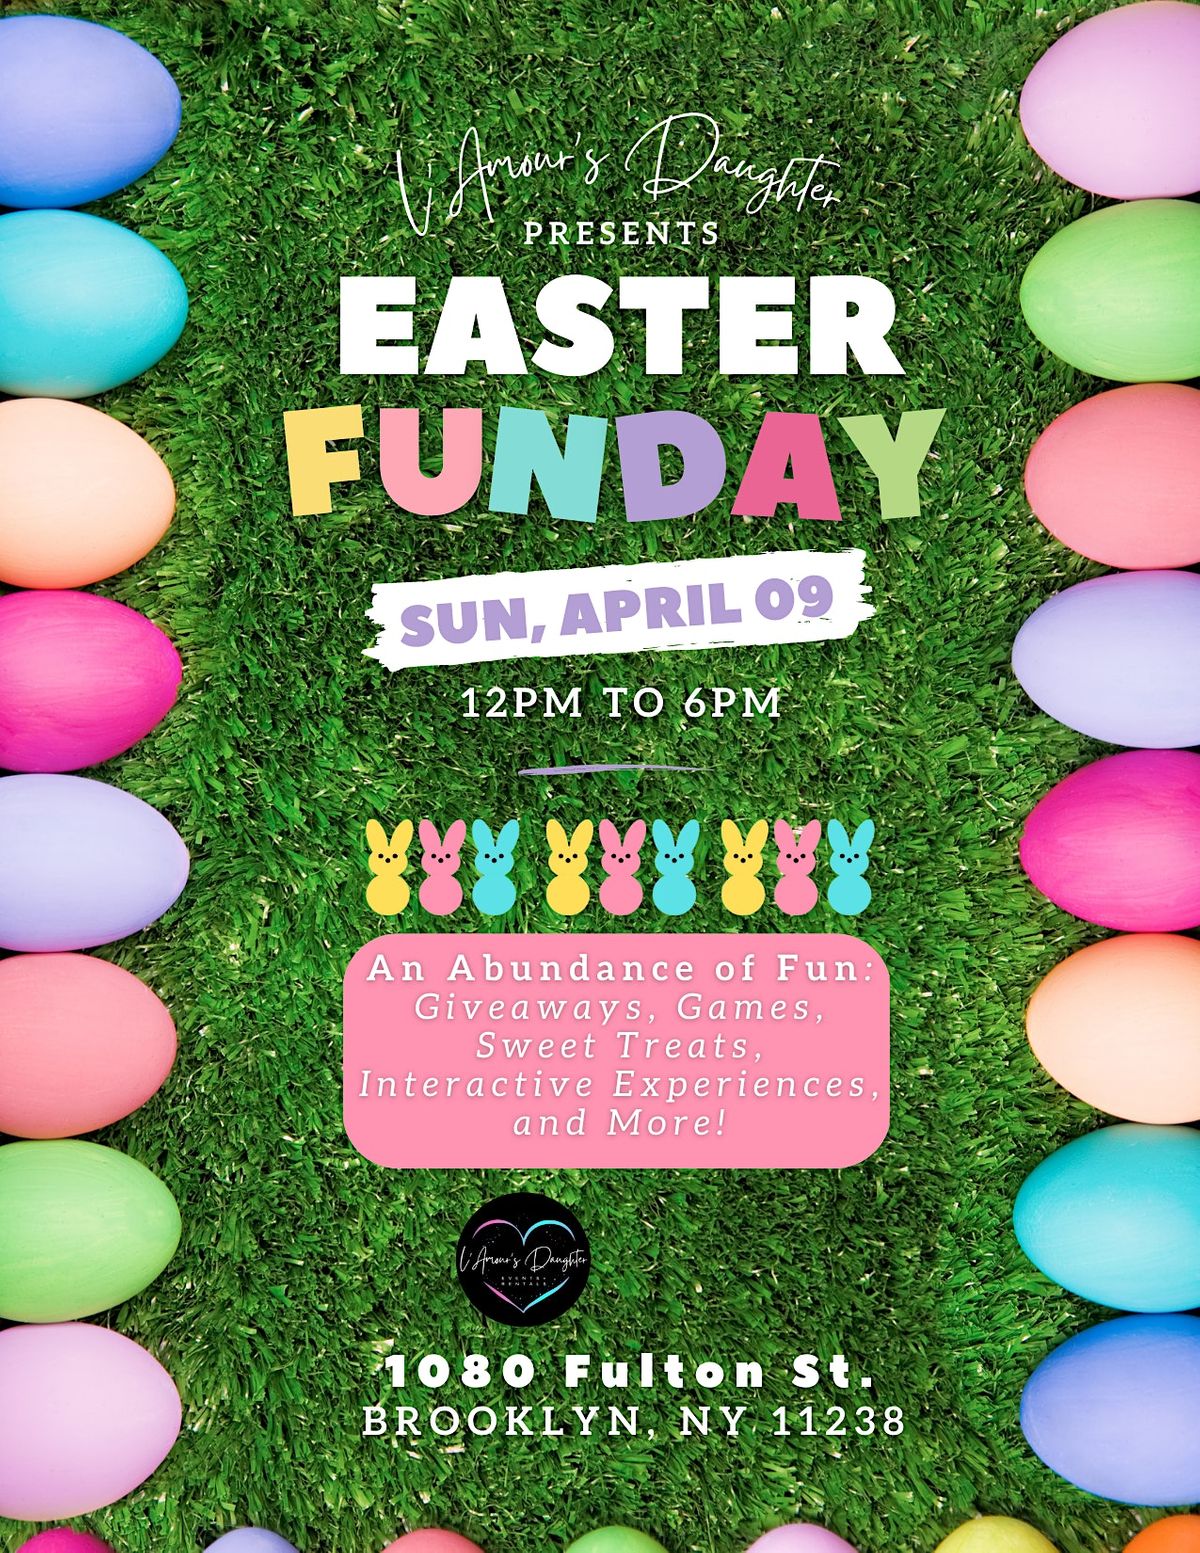 L'Amour's Daughter EASTER FUNDAY FAMILY POP UP